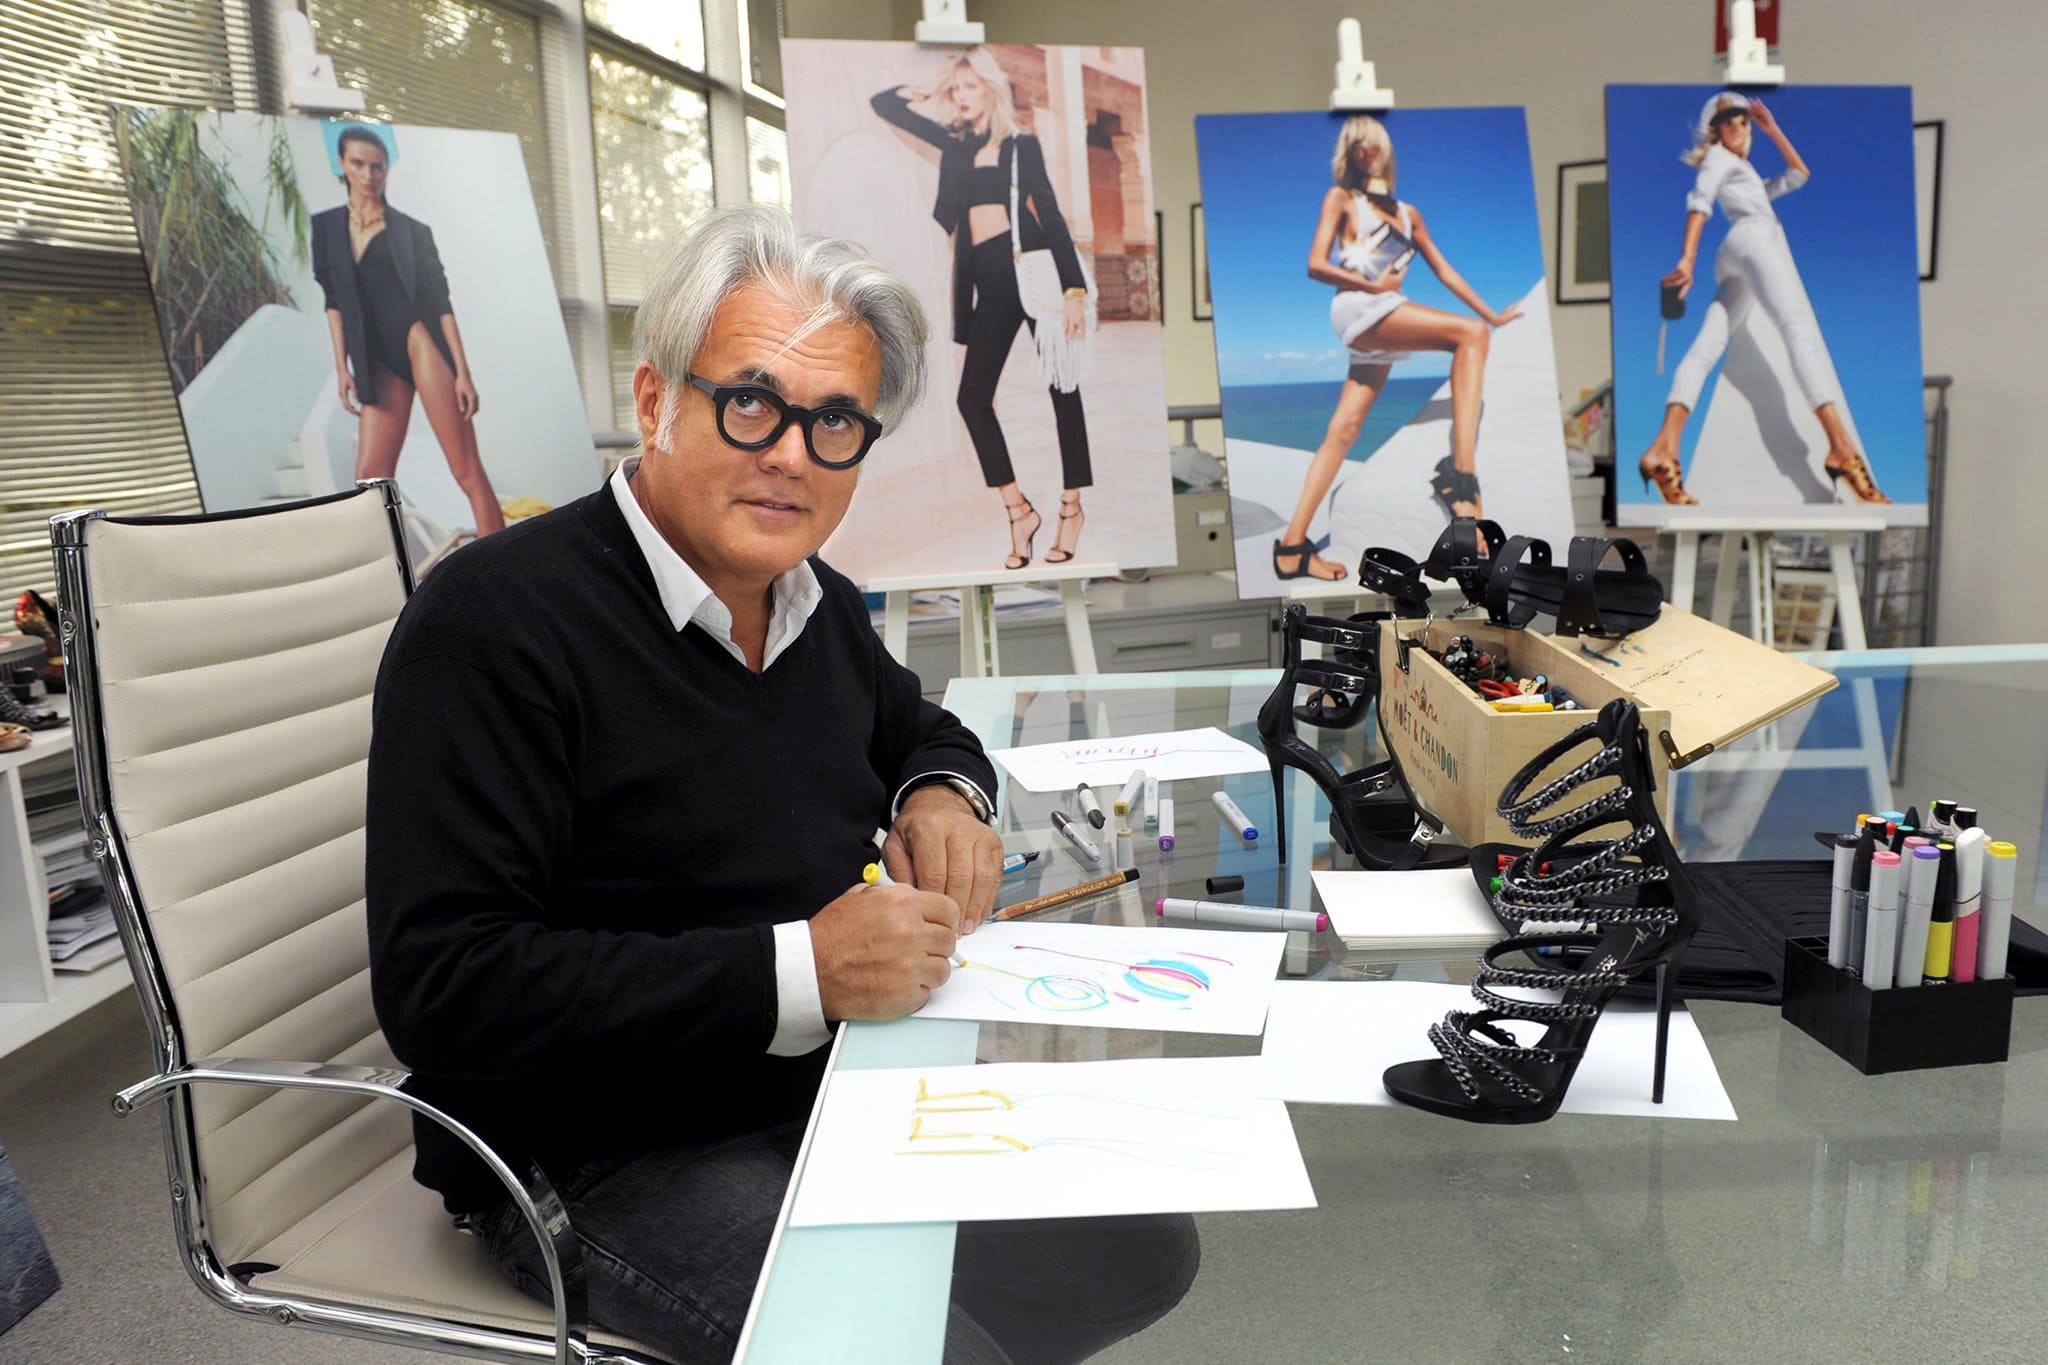 Giuseppe Zanotti is headquartered in his hometown of San Mauro Pascoli in Italy